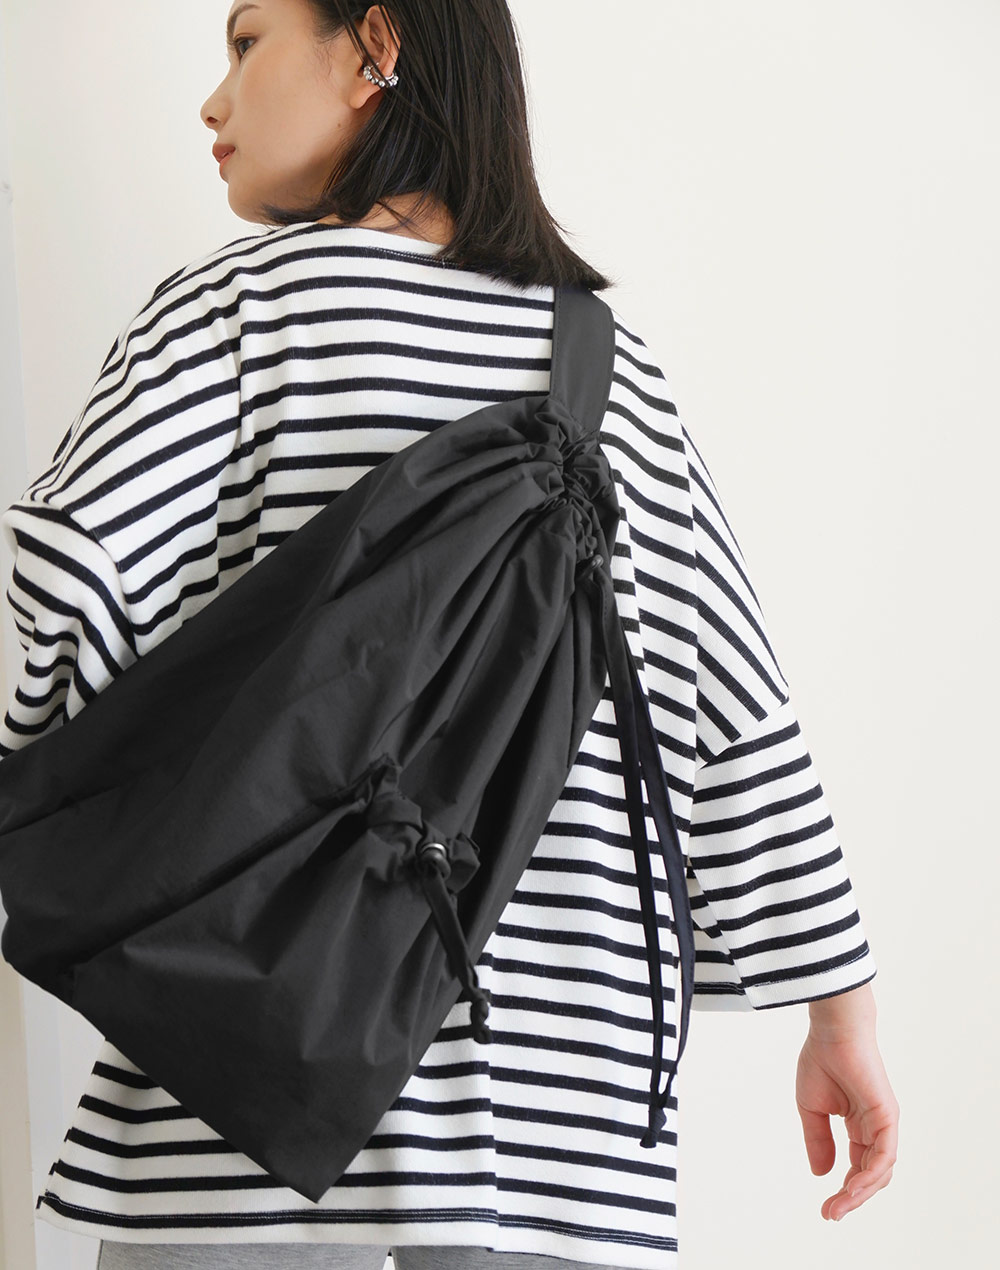 One-Shoulder Packable Backpack・d273447（バッグ/バッグ）| shiho_takechi | 東京ガールズマーケット